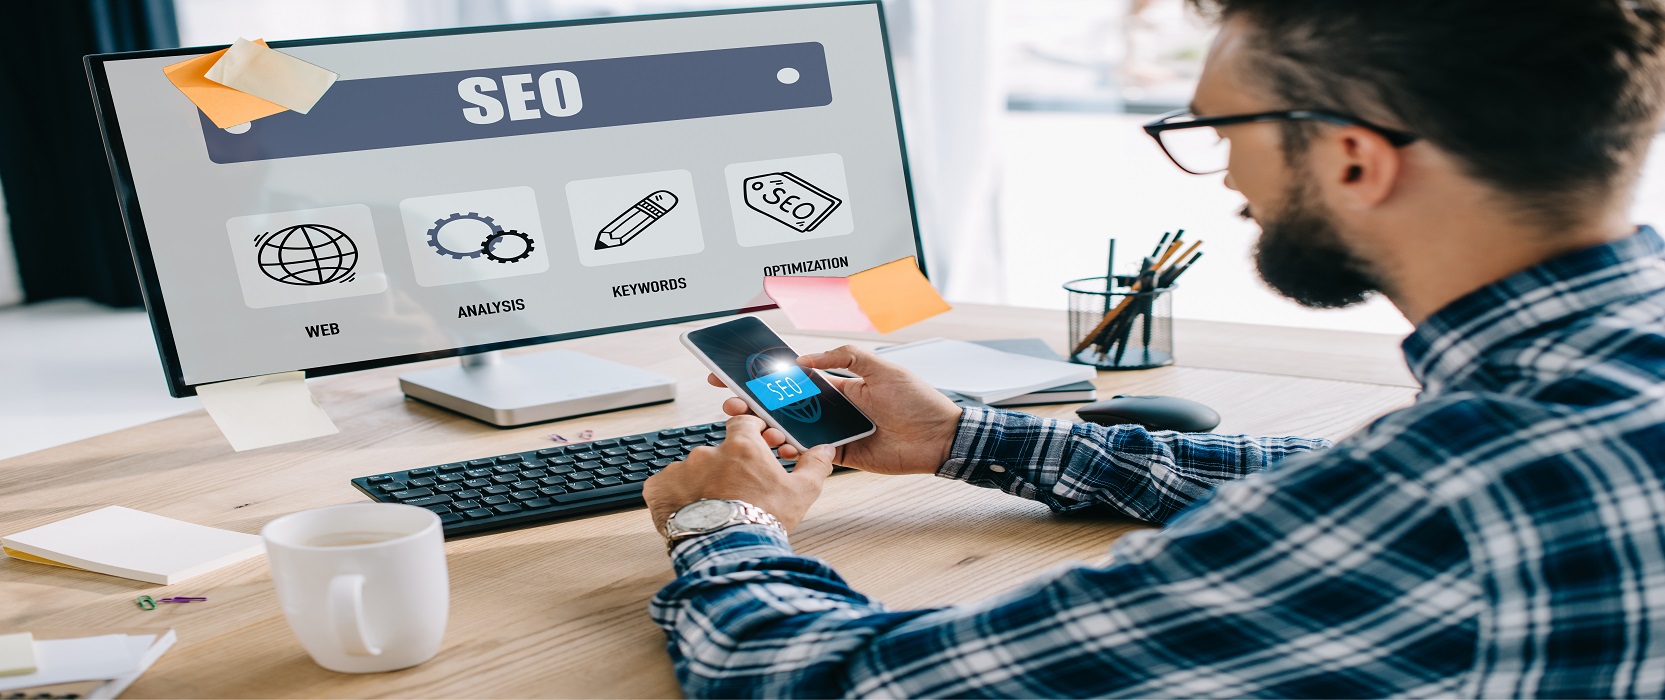 Learn about the 10 SEO trends in 2021 that are important